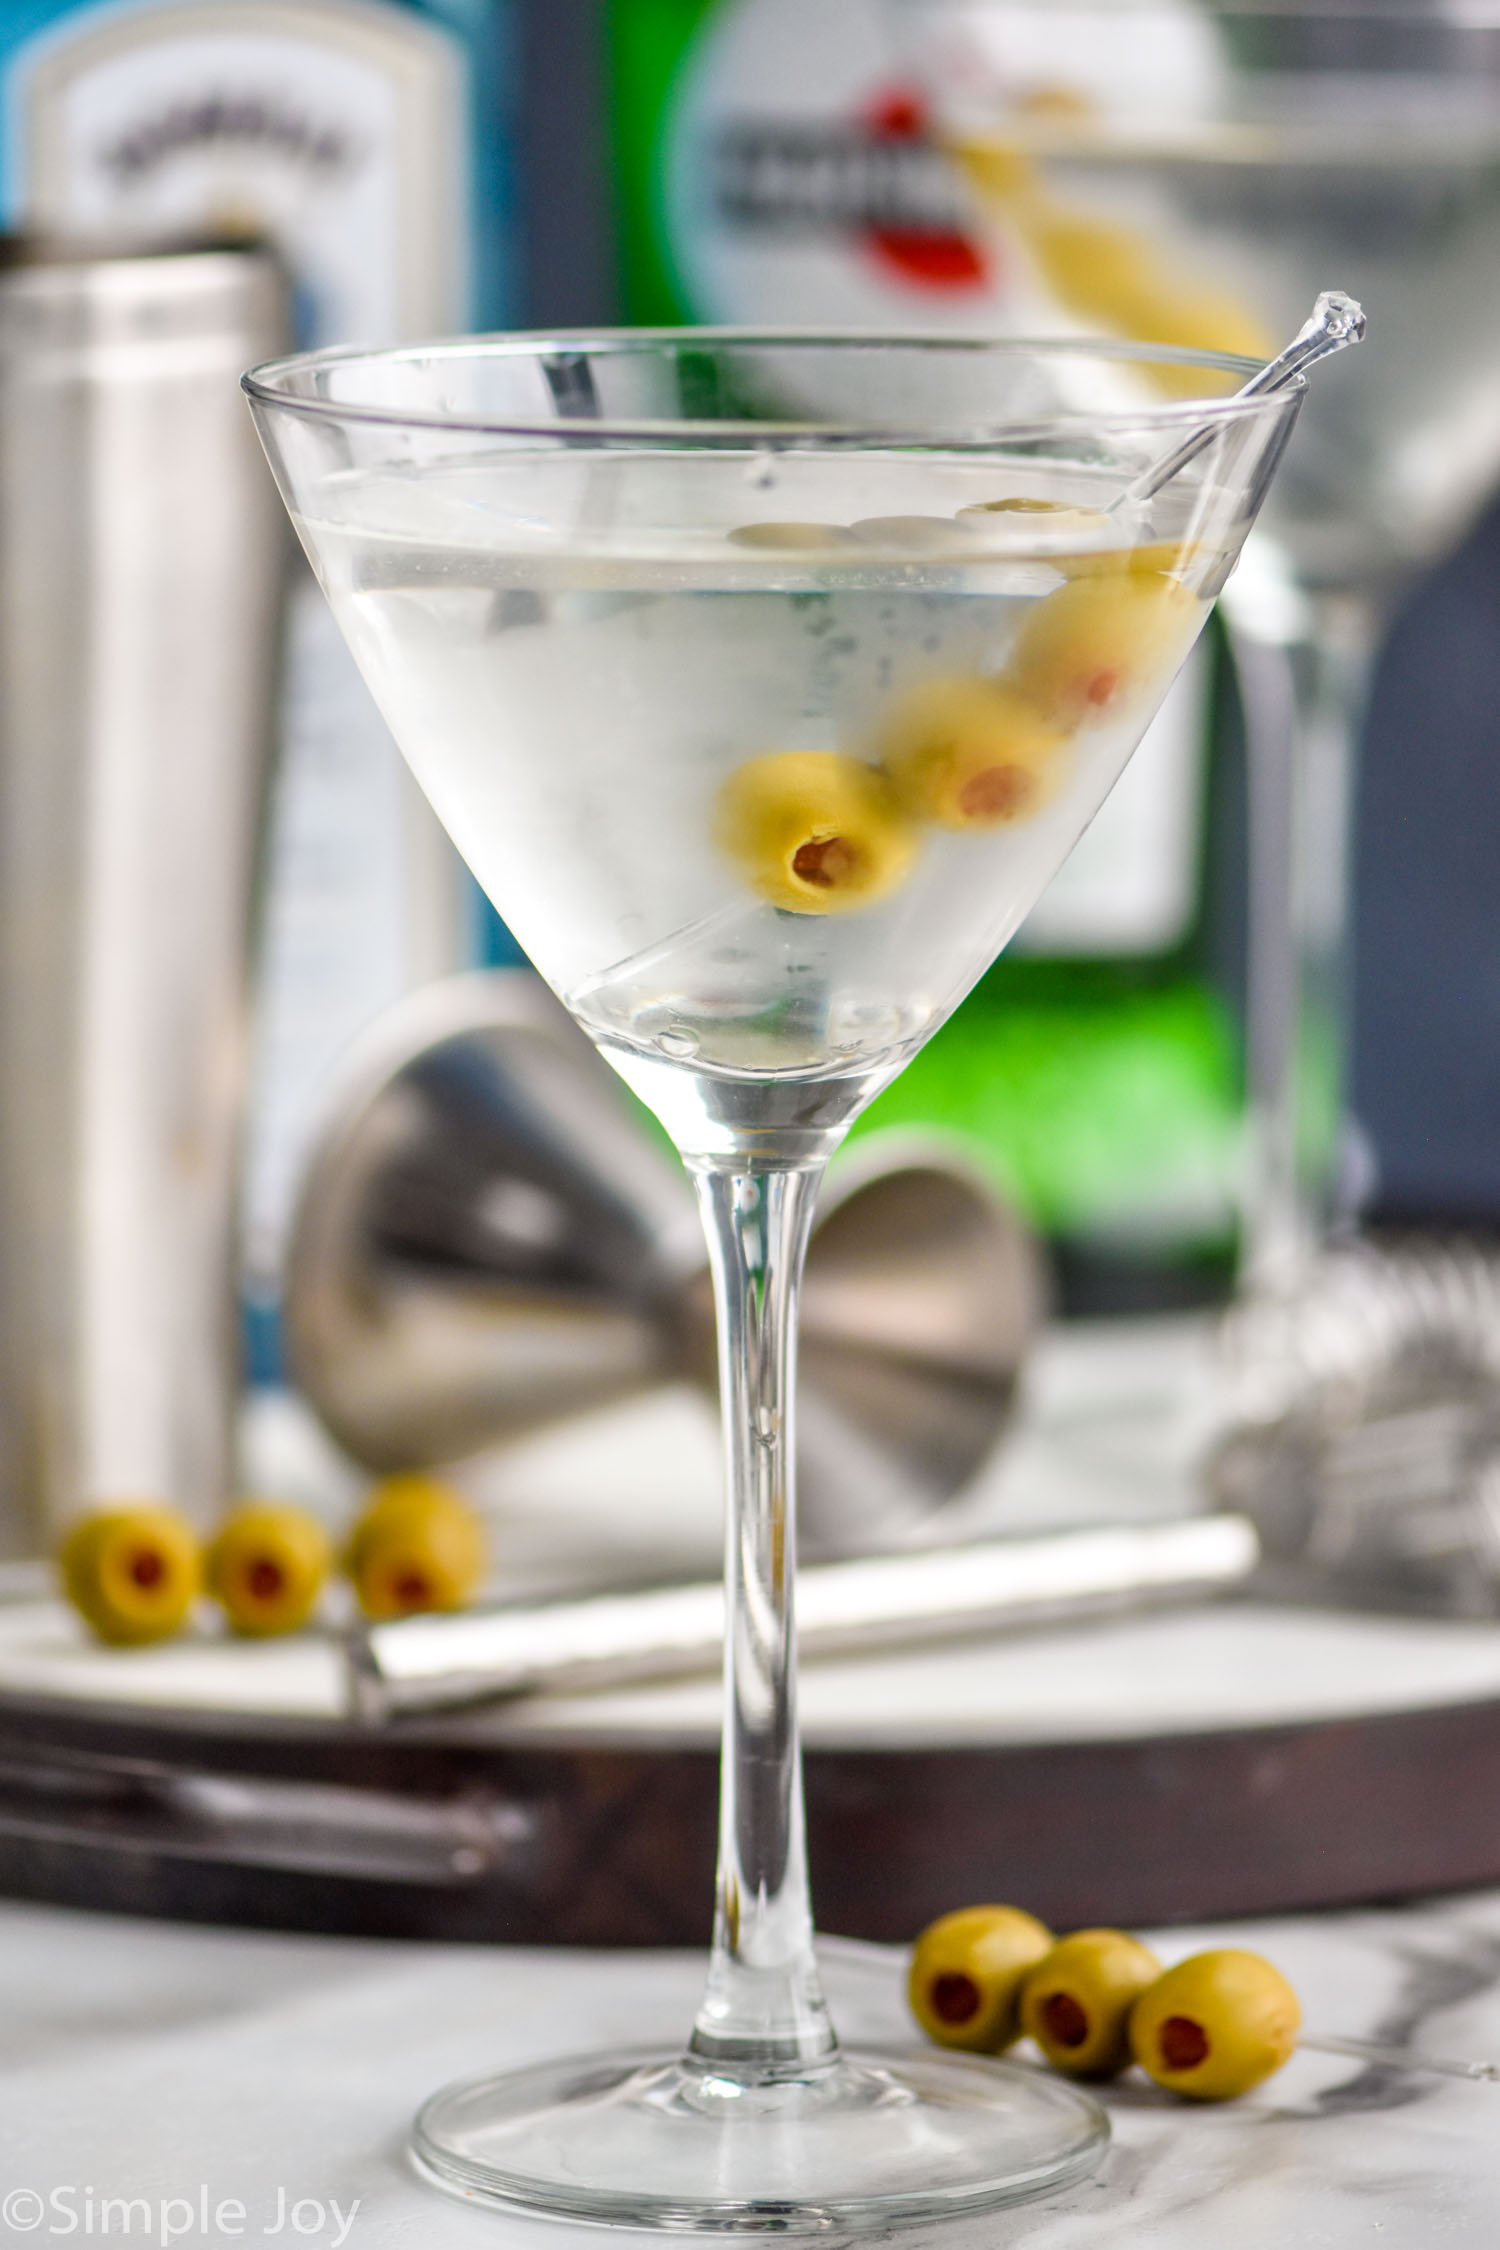 26 Martini Recipes - How To Make A Martini Cocktail With Gin or Vodka